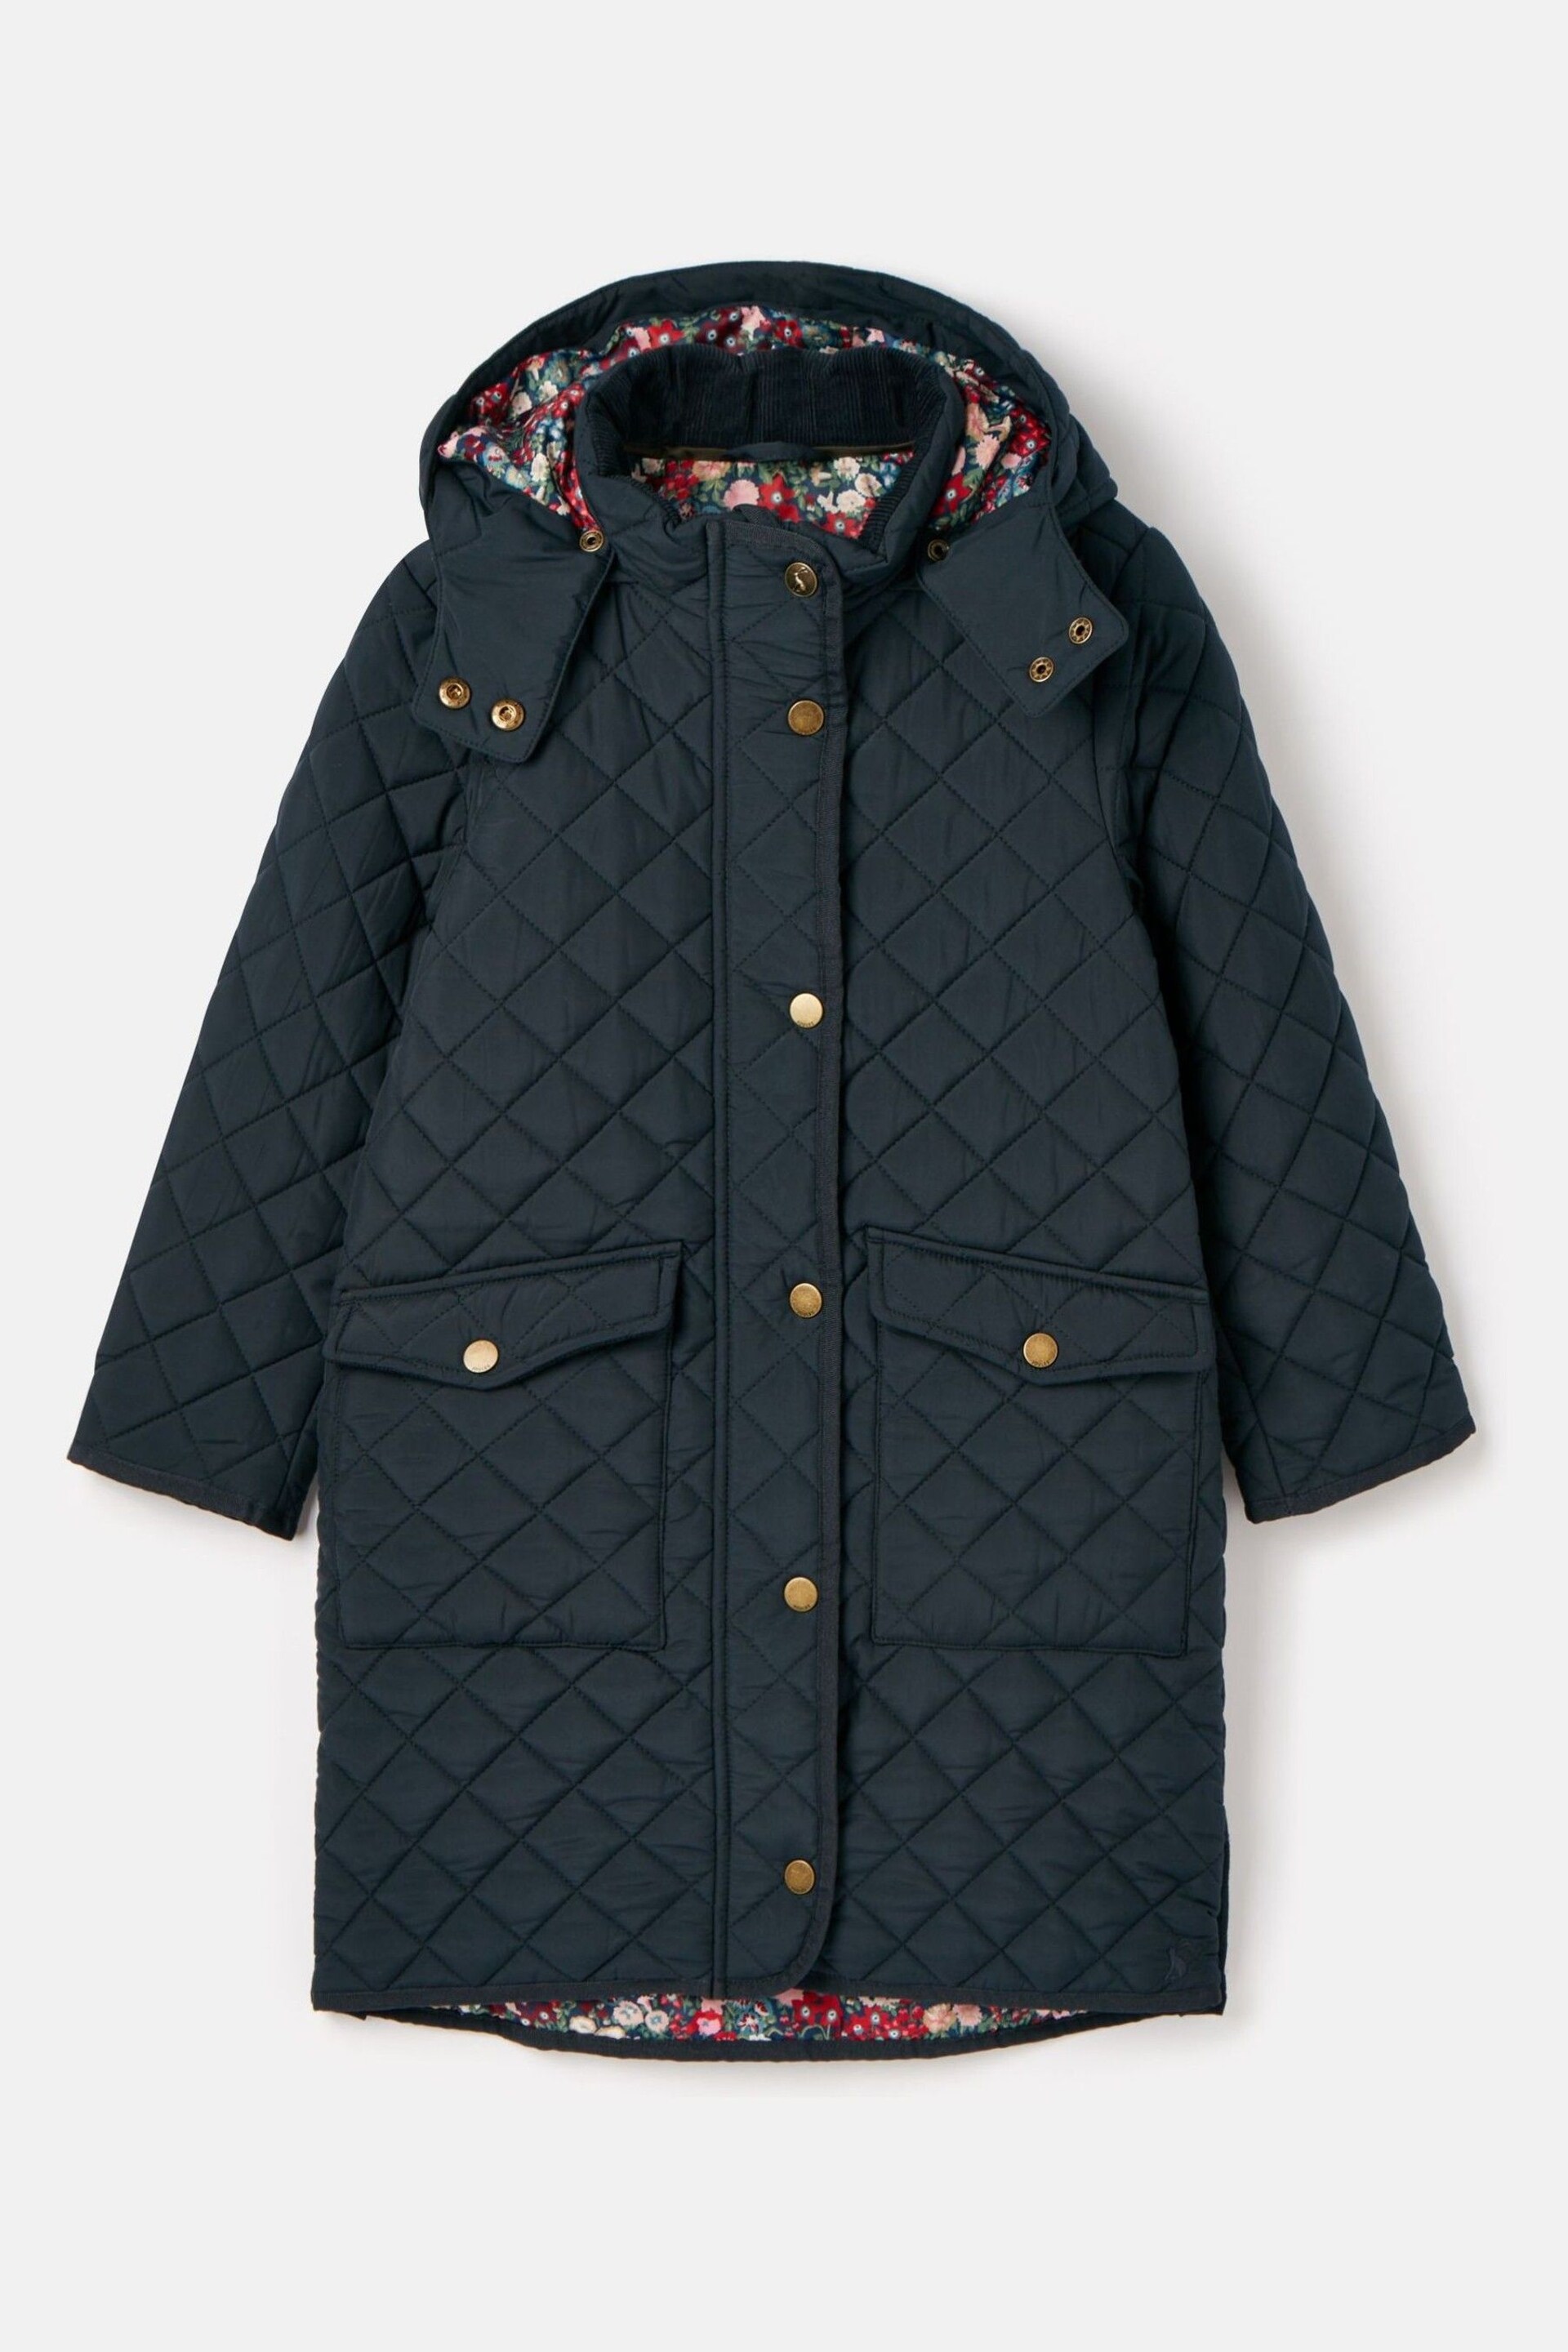 Joules Chatham Navy Showerproof Padded Quilted Coat - Image 1 of 7